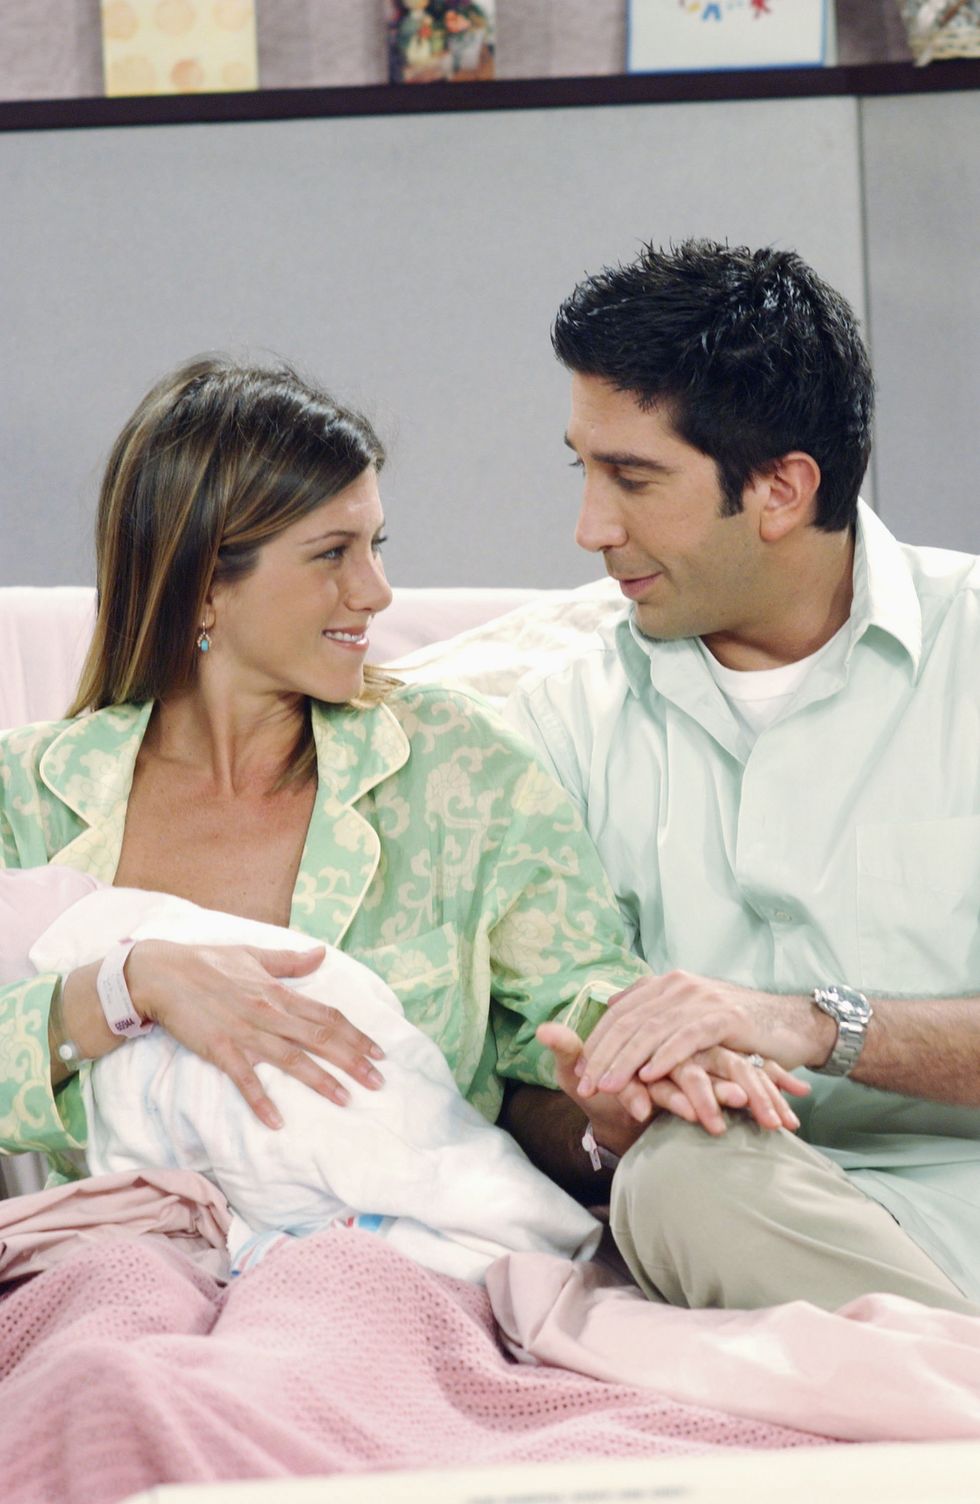 jennifer aniston and david schwimmer admit they had feelings for each other while filming friends